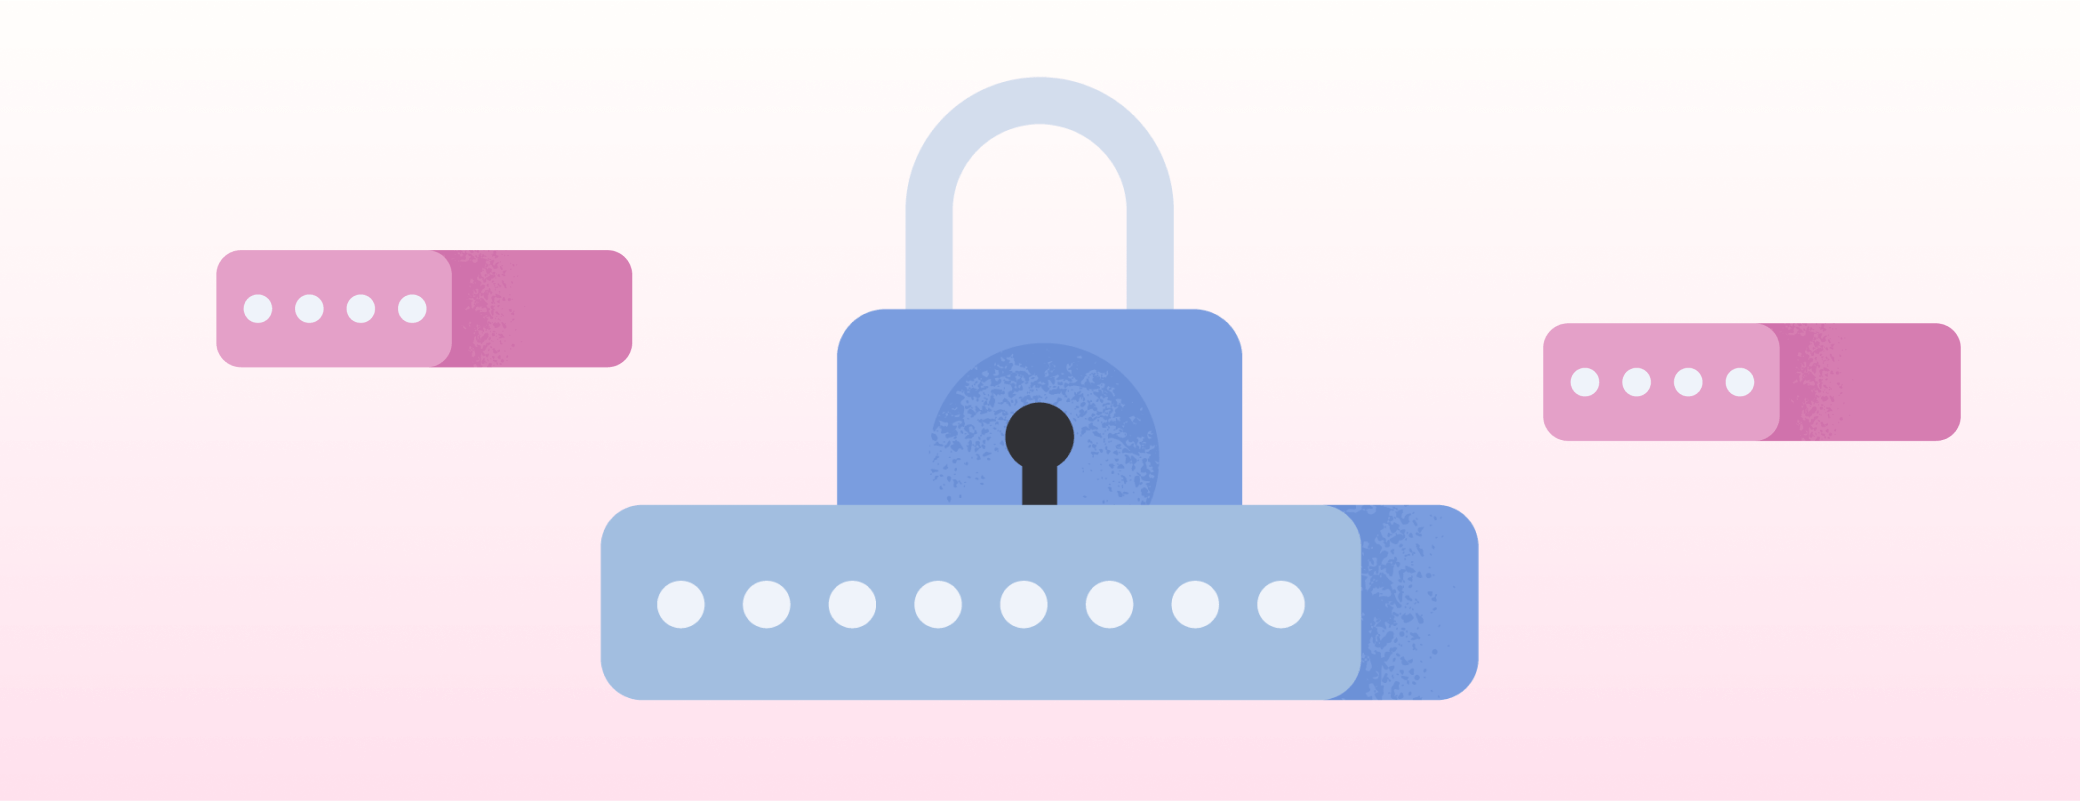 How secure is my password? A guide to staying safe online